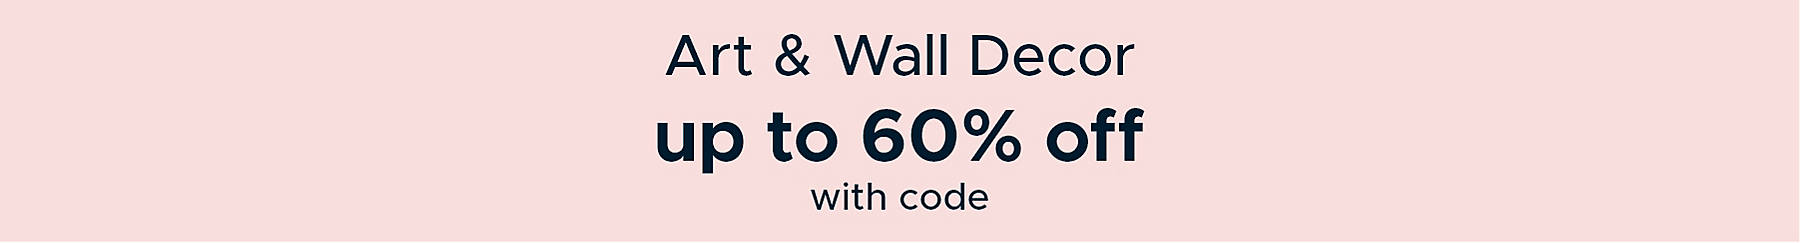 Art & Wall Decor up to 60% off with code